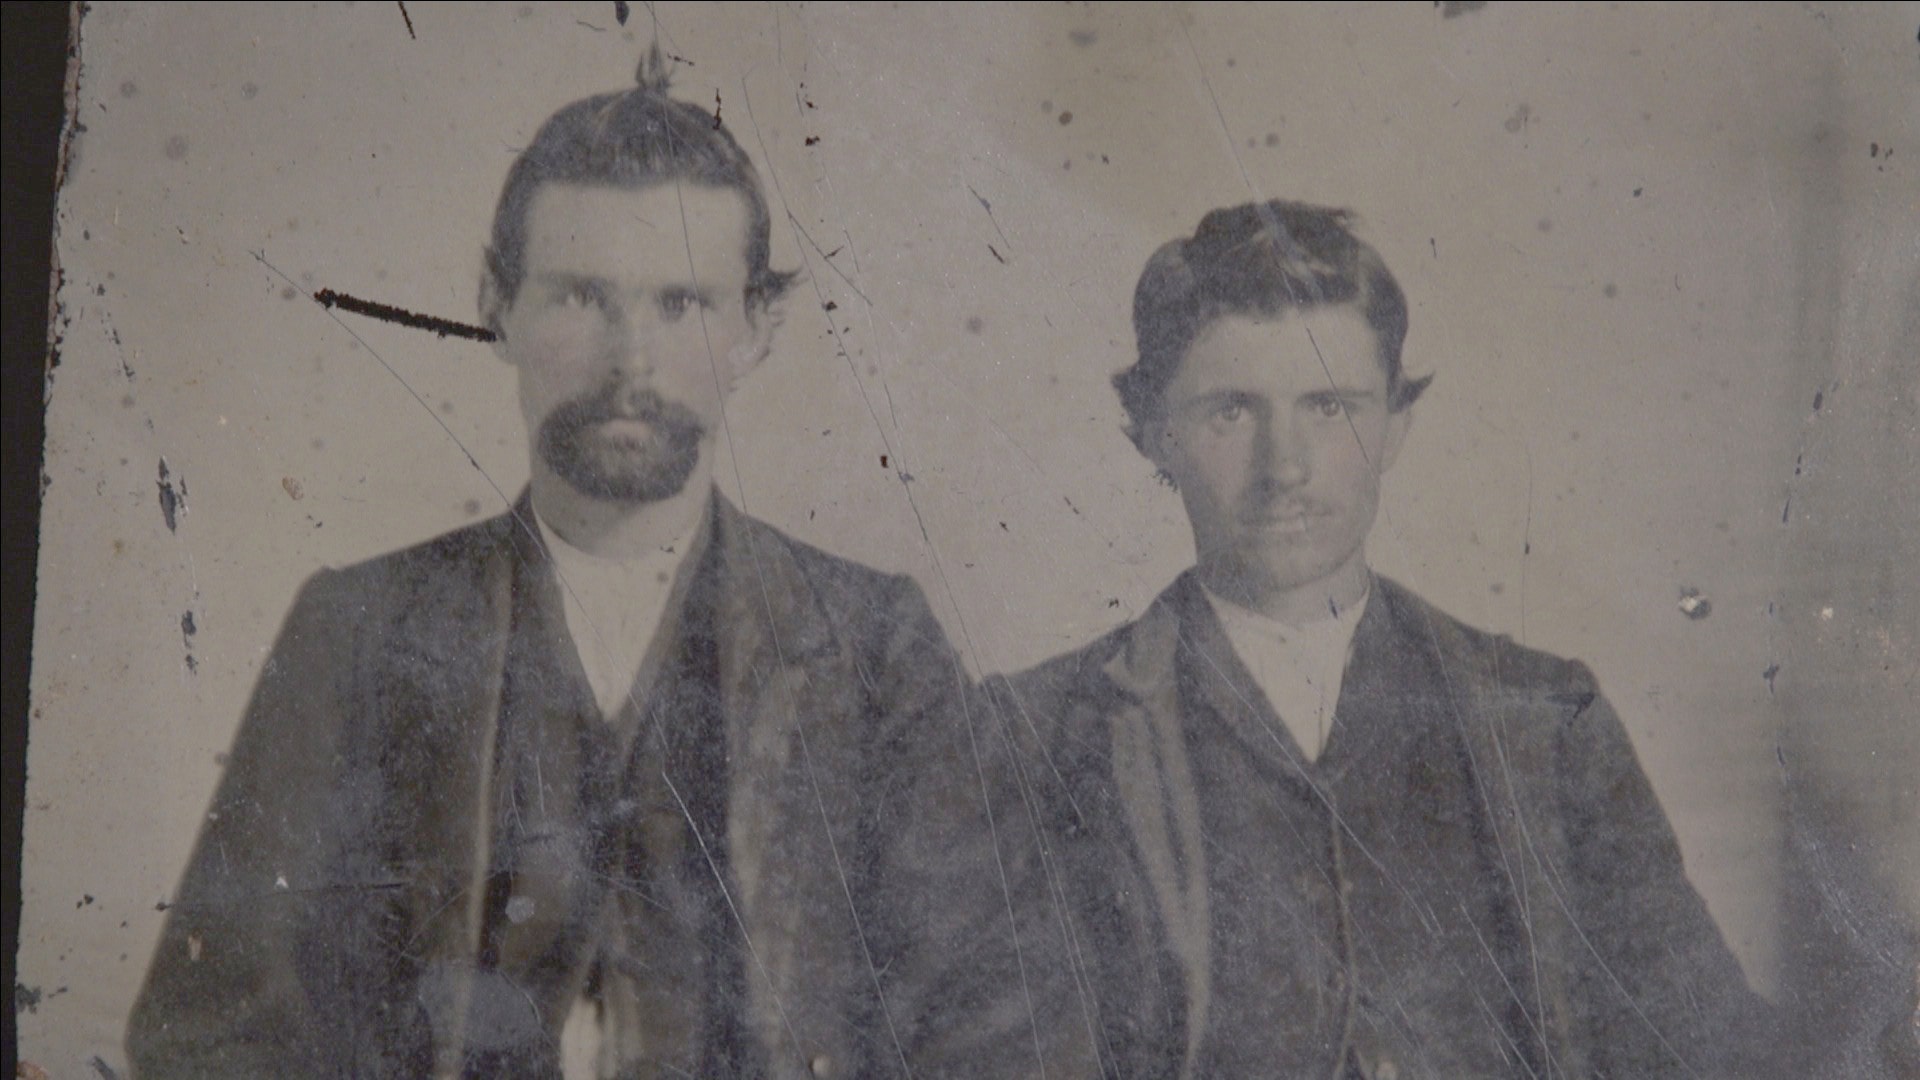 Heir Cashes in on Controversial Jesse James Photo | Fox Business